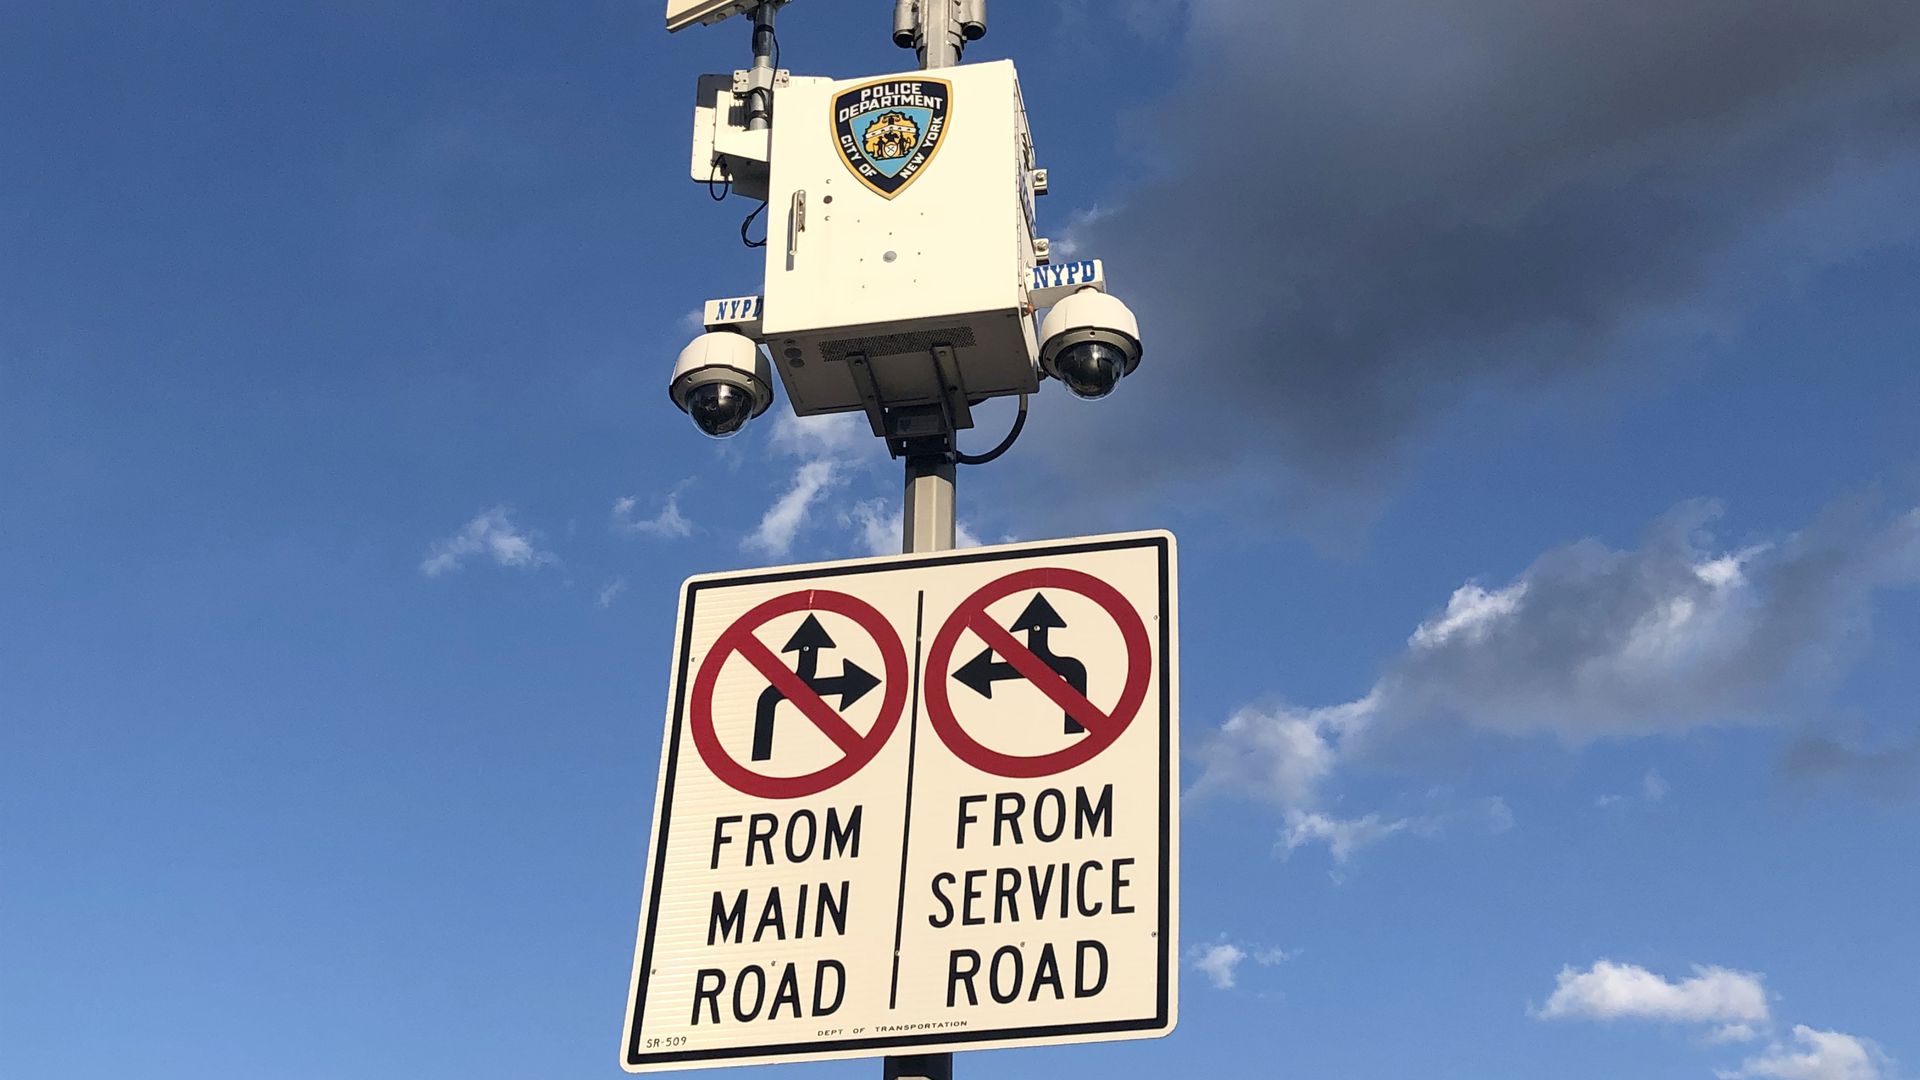 A red light camera in Queens, New York. Photo: Lindsey Nicholson/Education Images/Universal Images Group via Getty Images